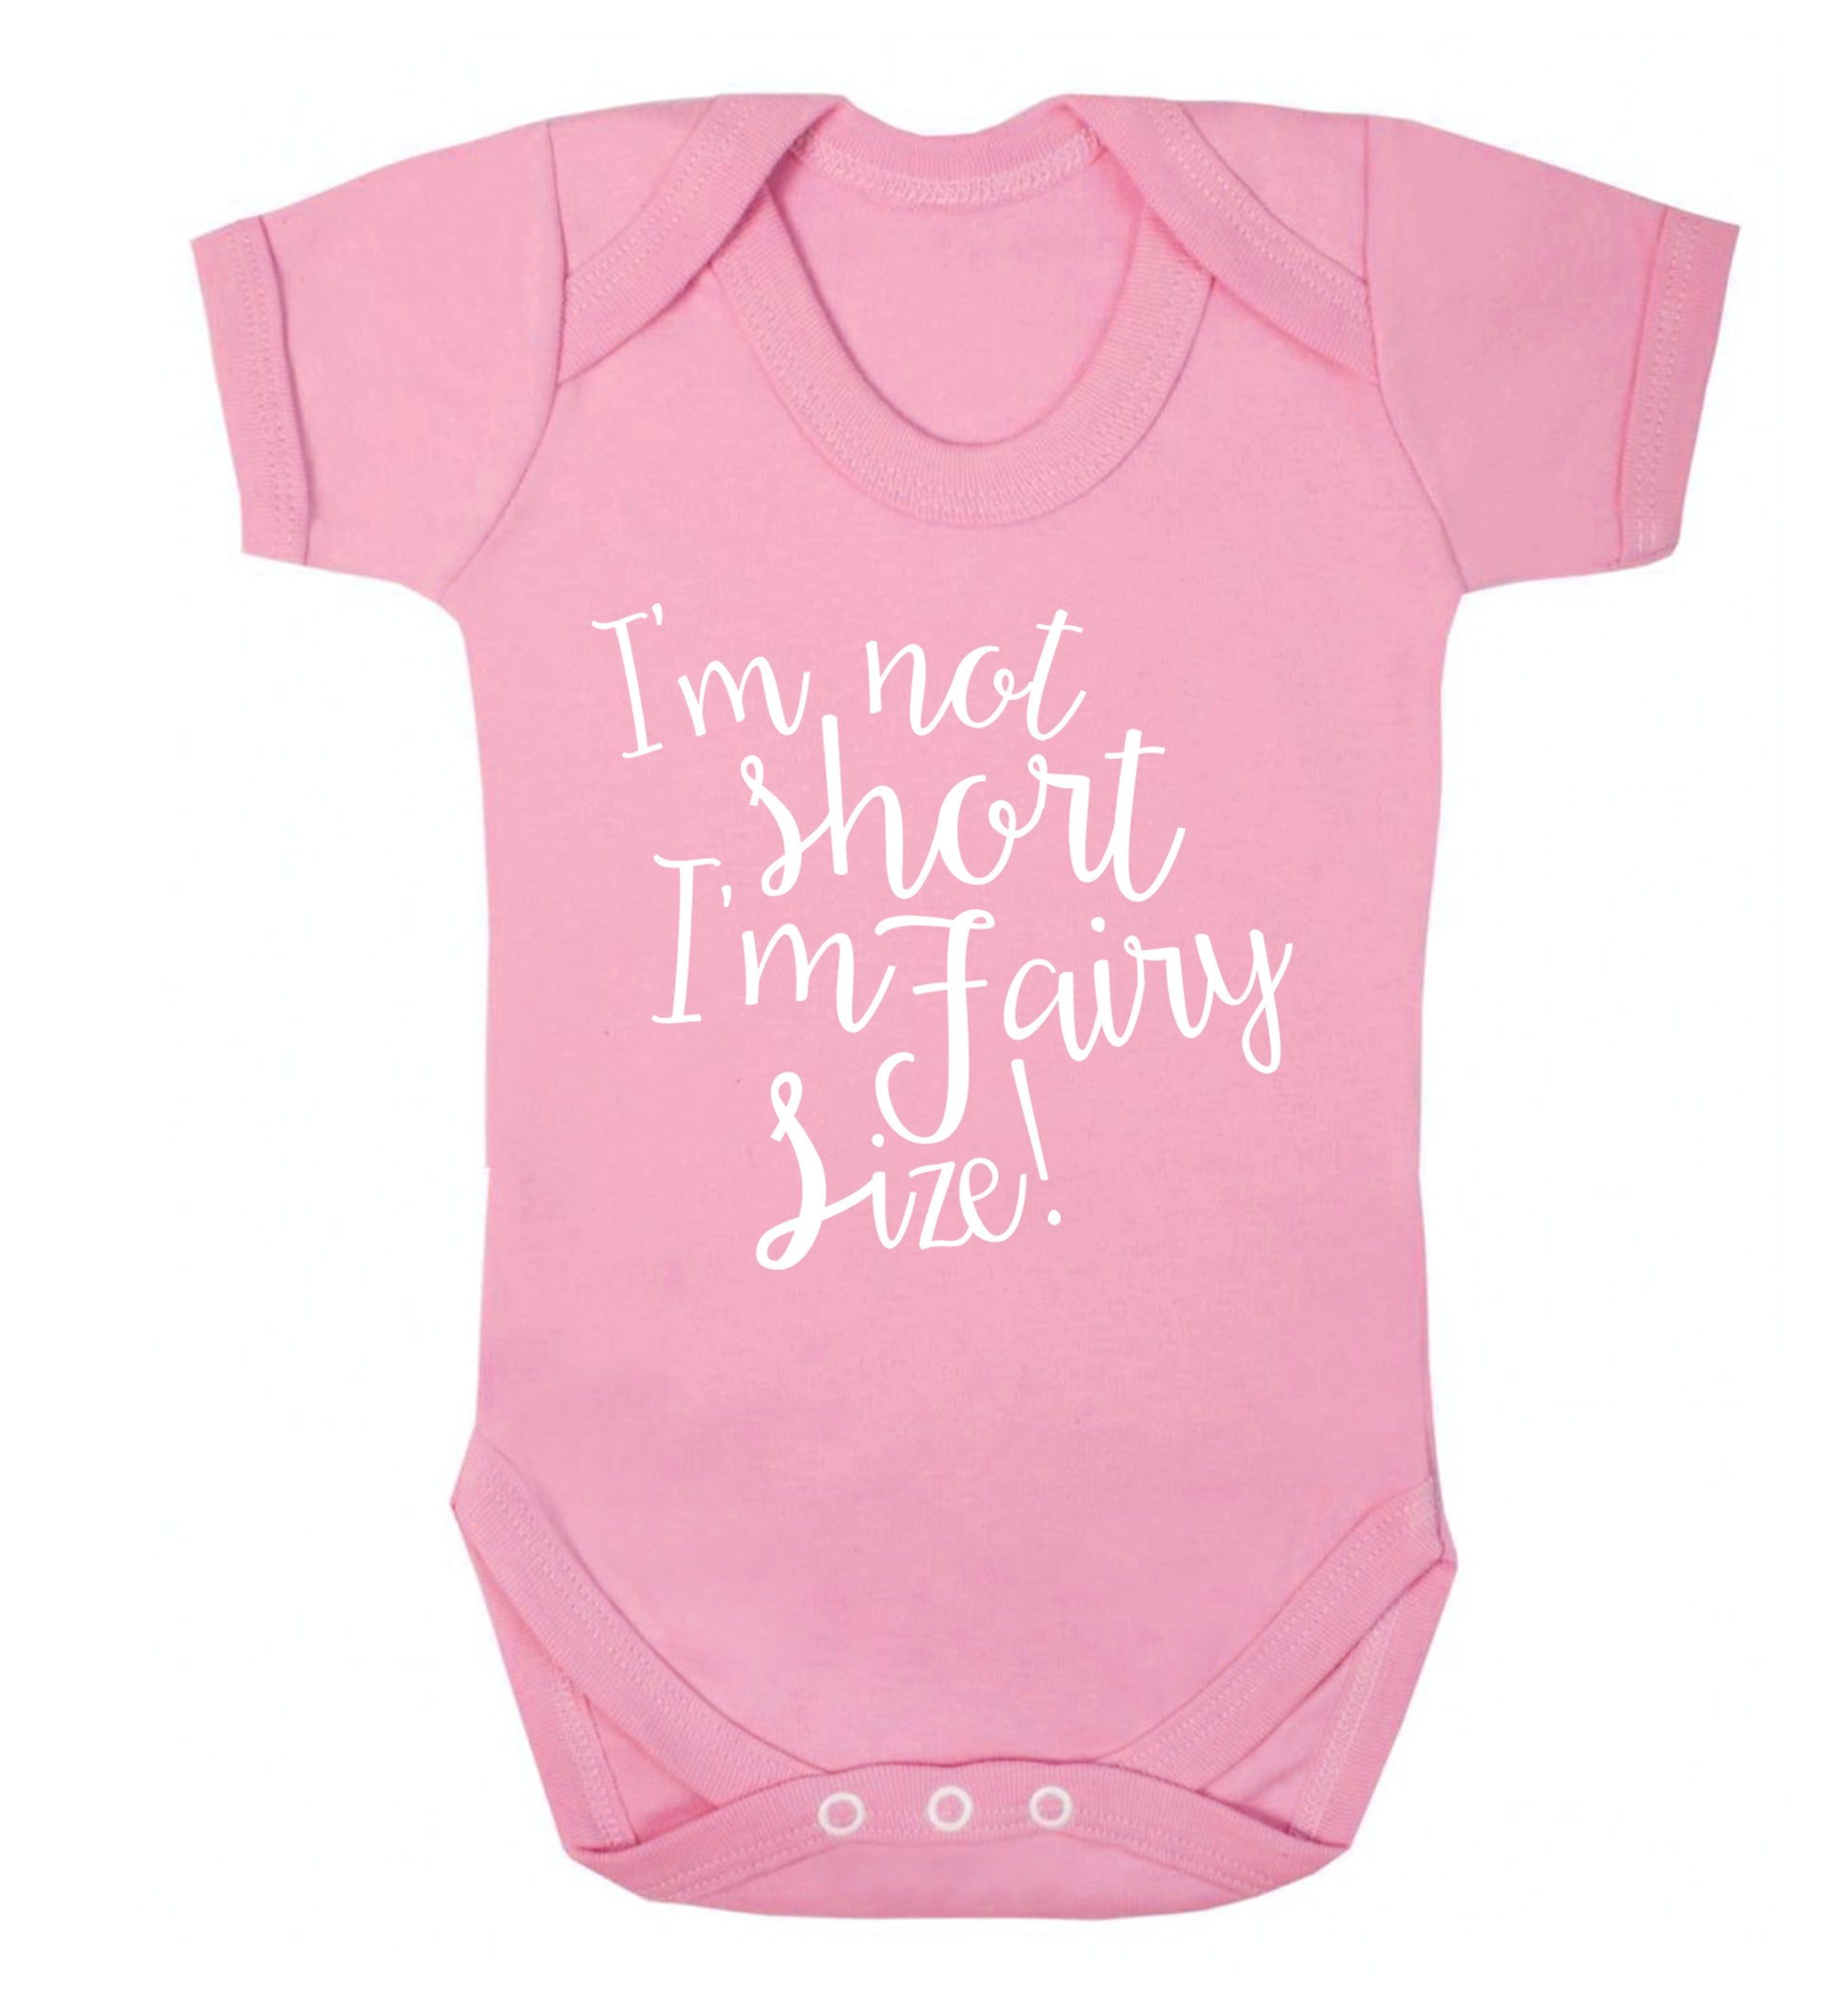 I'm not short I'm fairy sized! Baby Vest pale pink 18-24 months